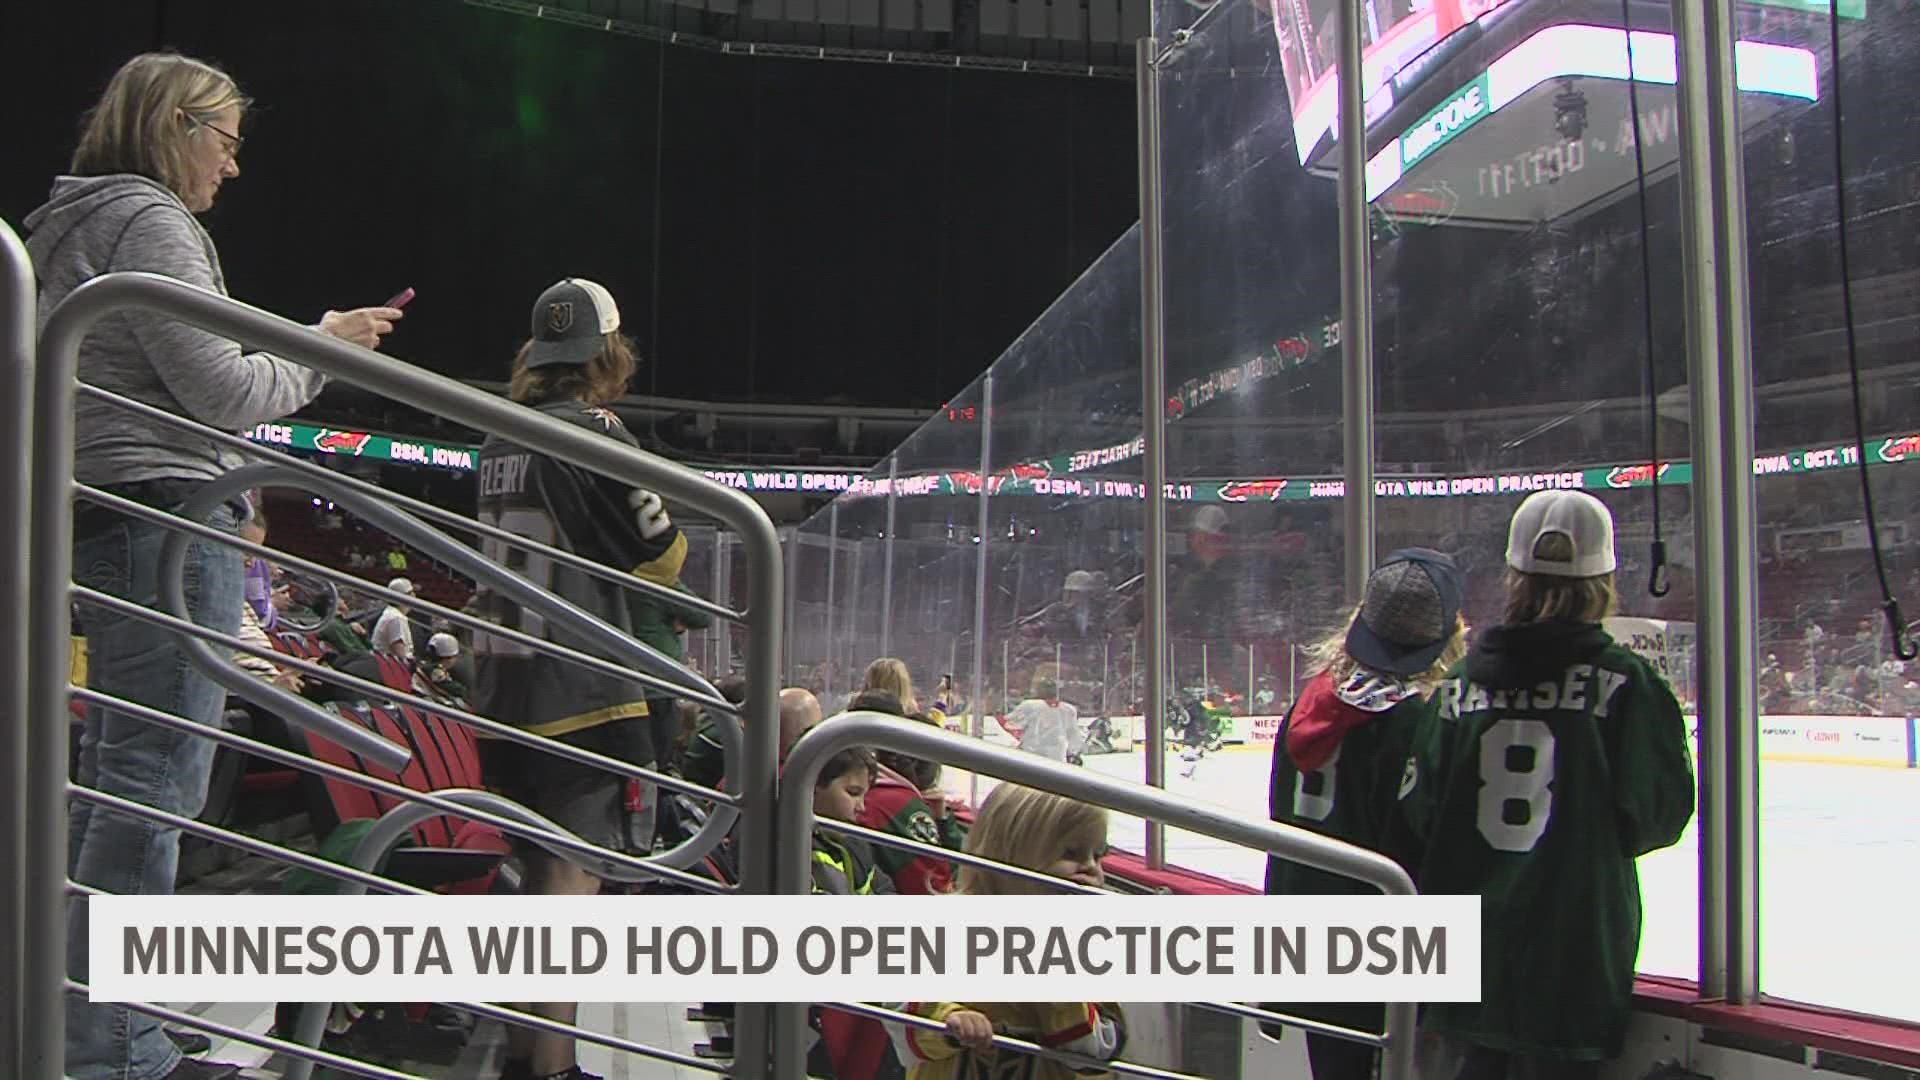 The Minnesota Wild held an open practice and autograph session at Wells Fargo Arean ahead of the season opener.